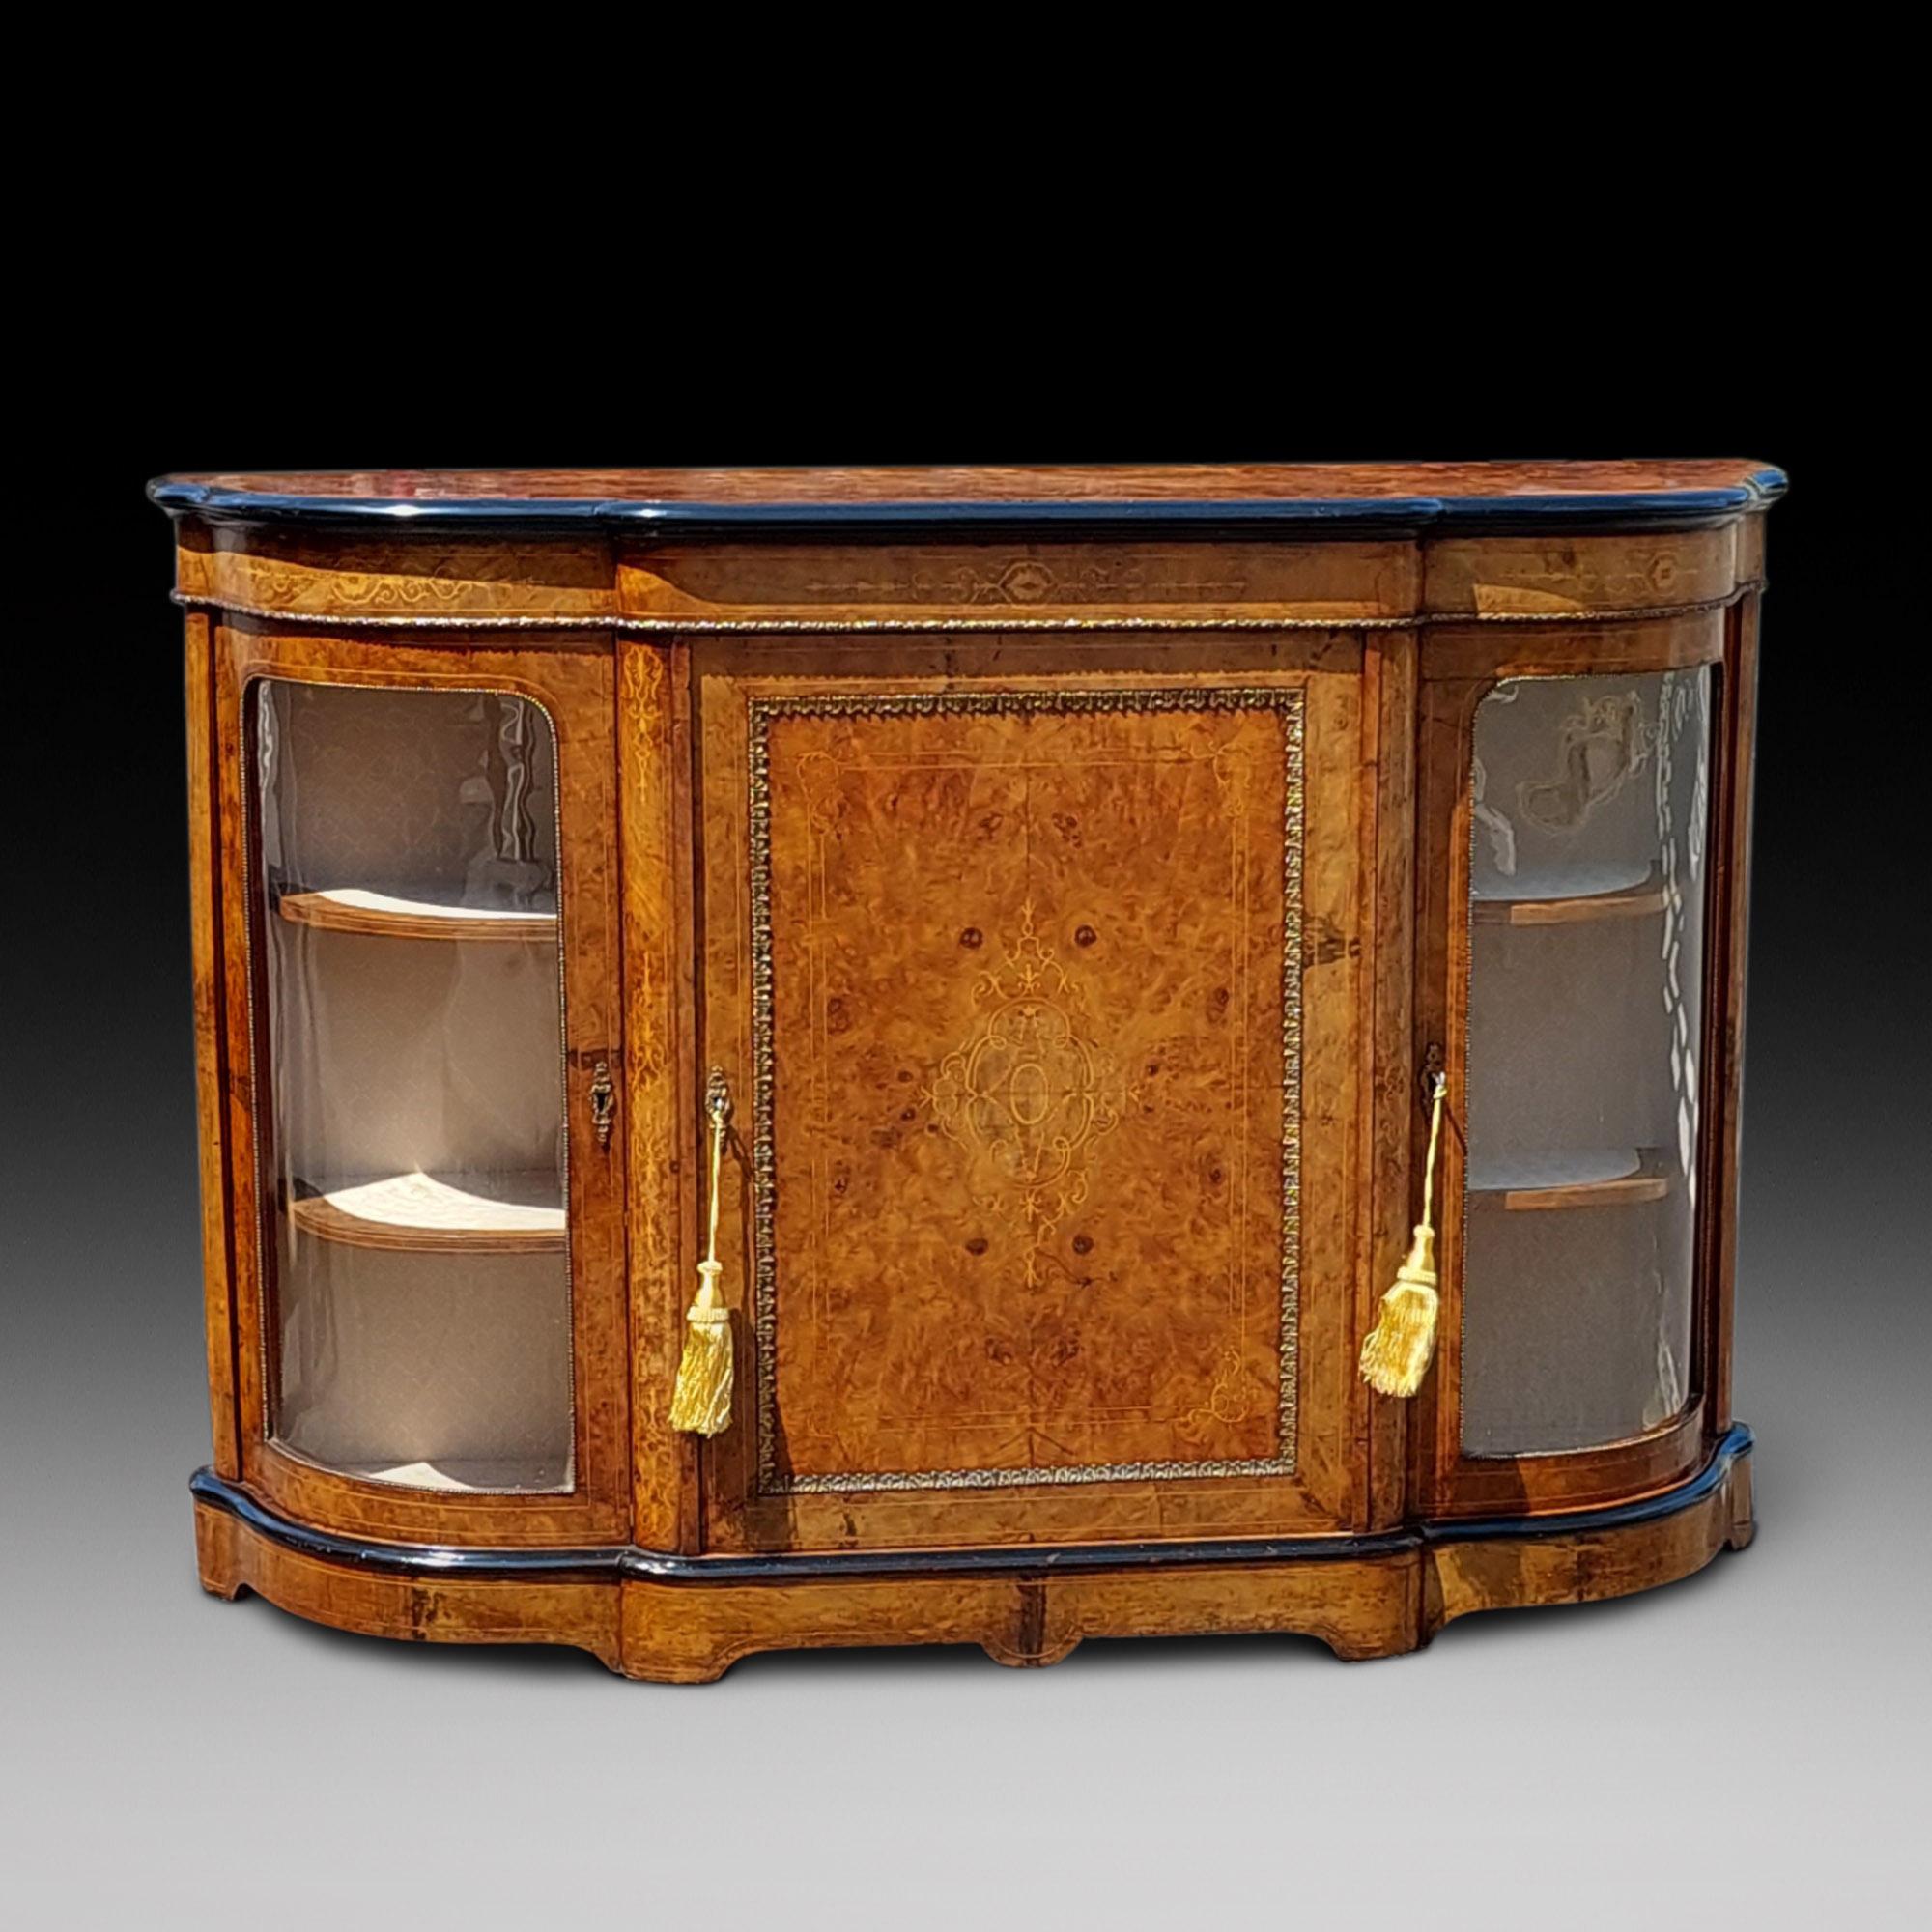 Victorian Burr Walnut Bow Fronted Credenza of Excellent Quality Inlaid with Sycamore and Boxwood, Ebonised & Decorated with Ormalu 61